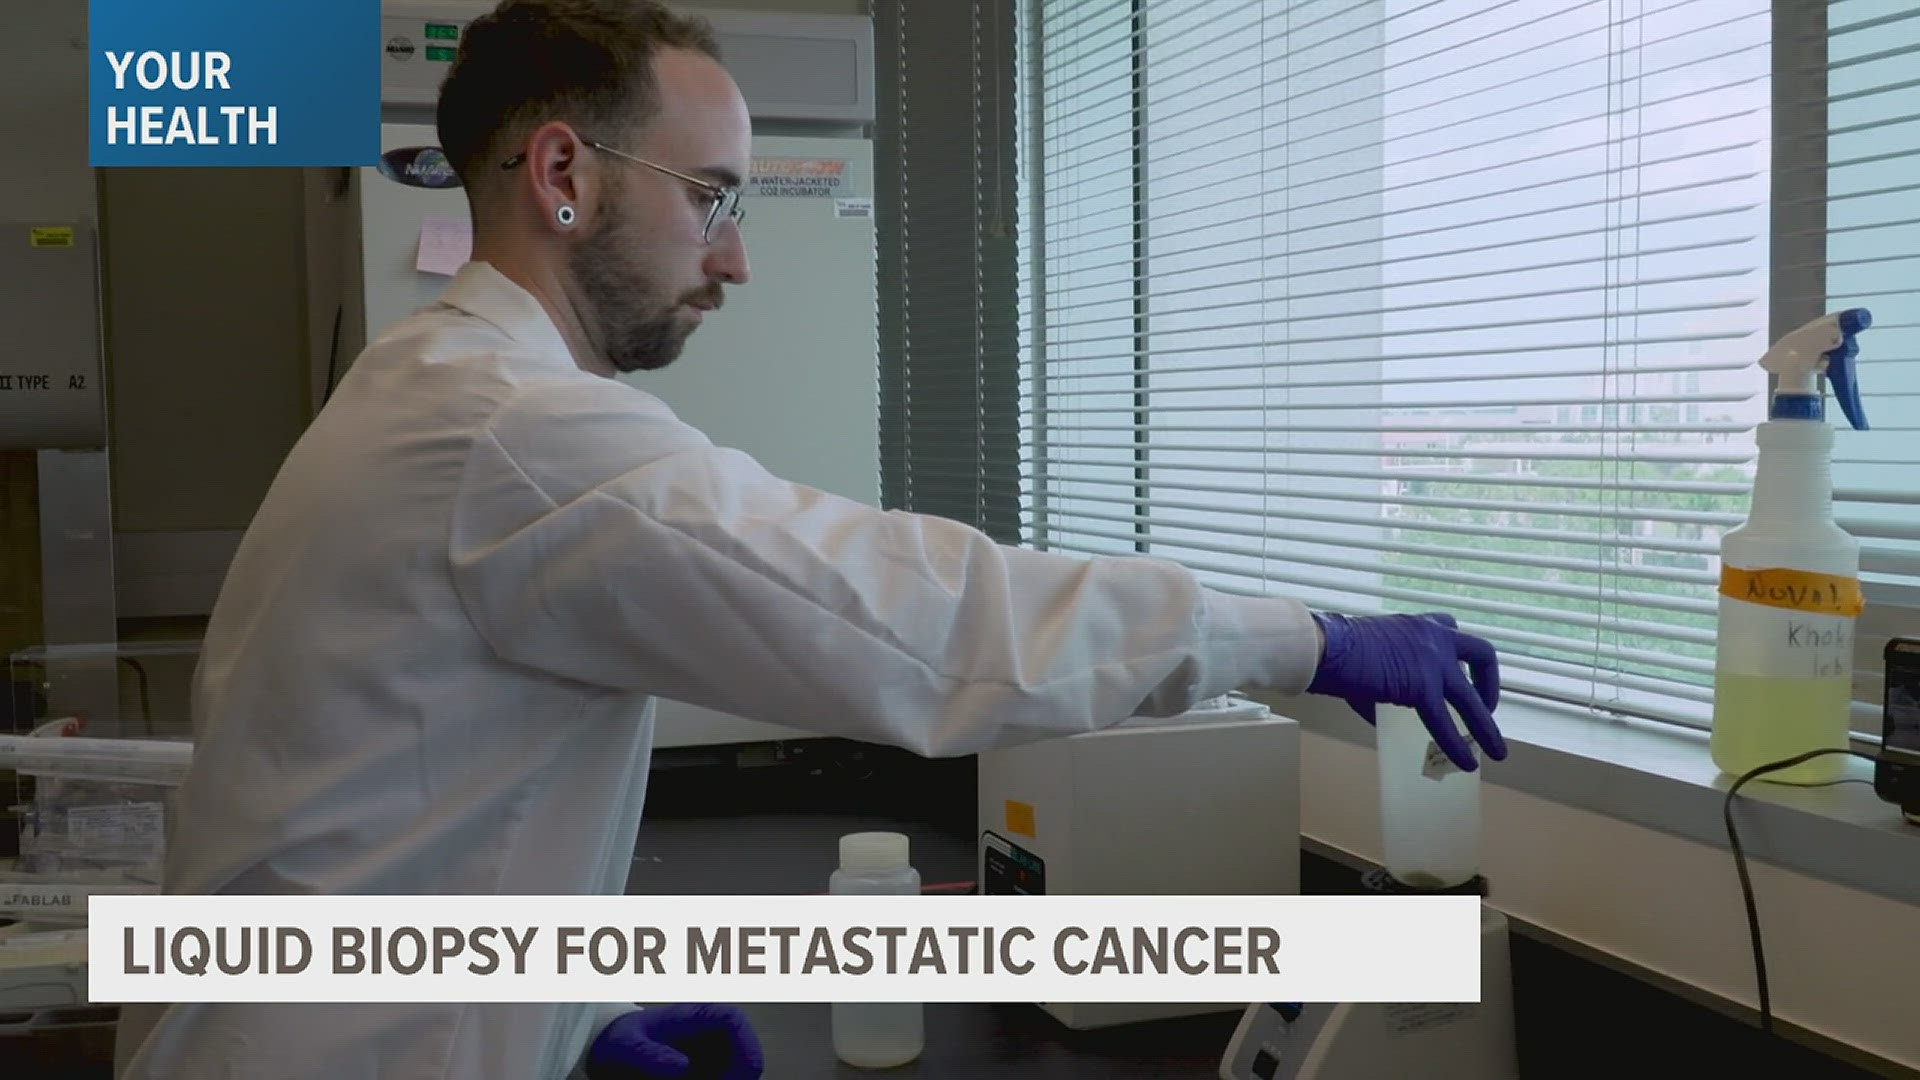 Florida scientists are seeking an alternative to tissue biopsies, and testing the efficacy and accuracy of fluid samples to detect metastasized cancer cells.